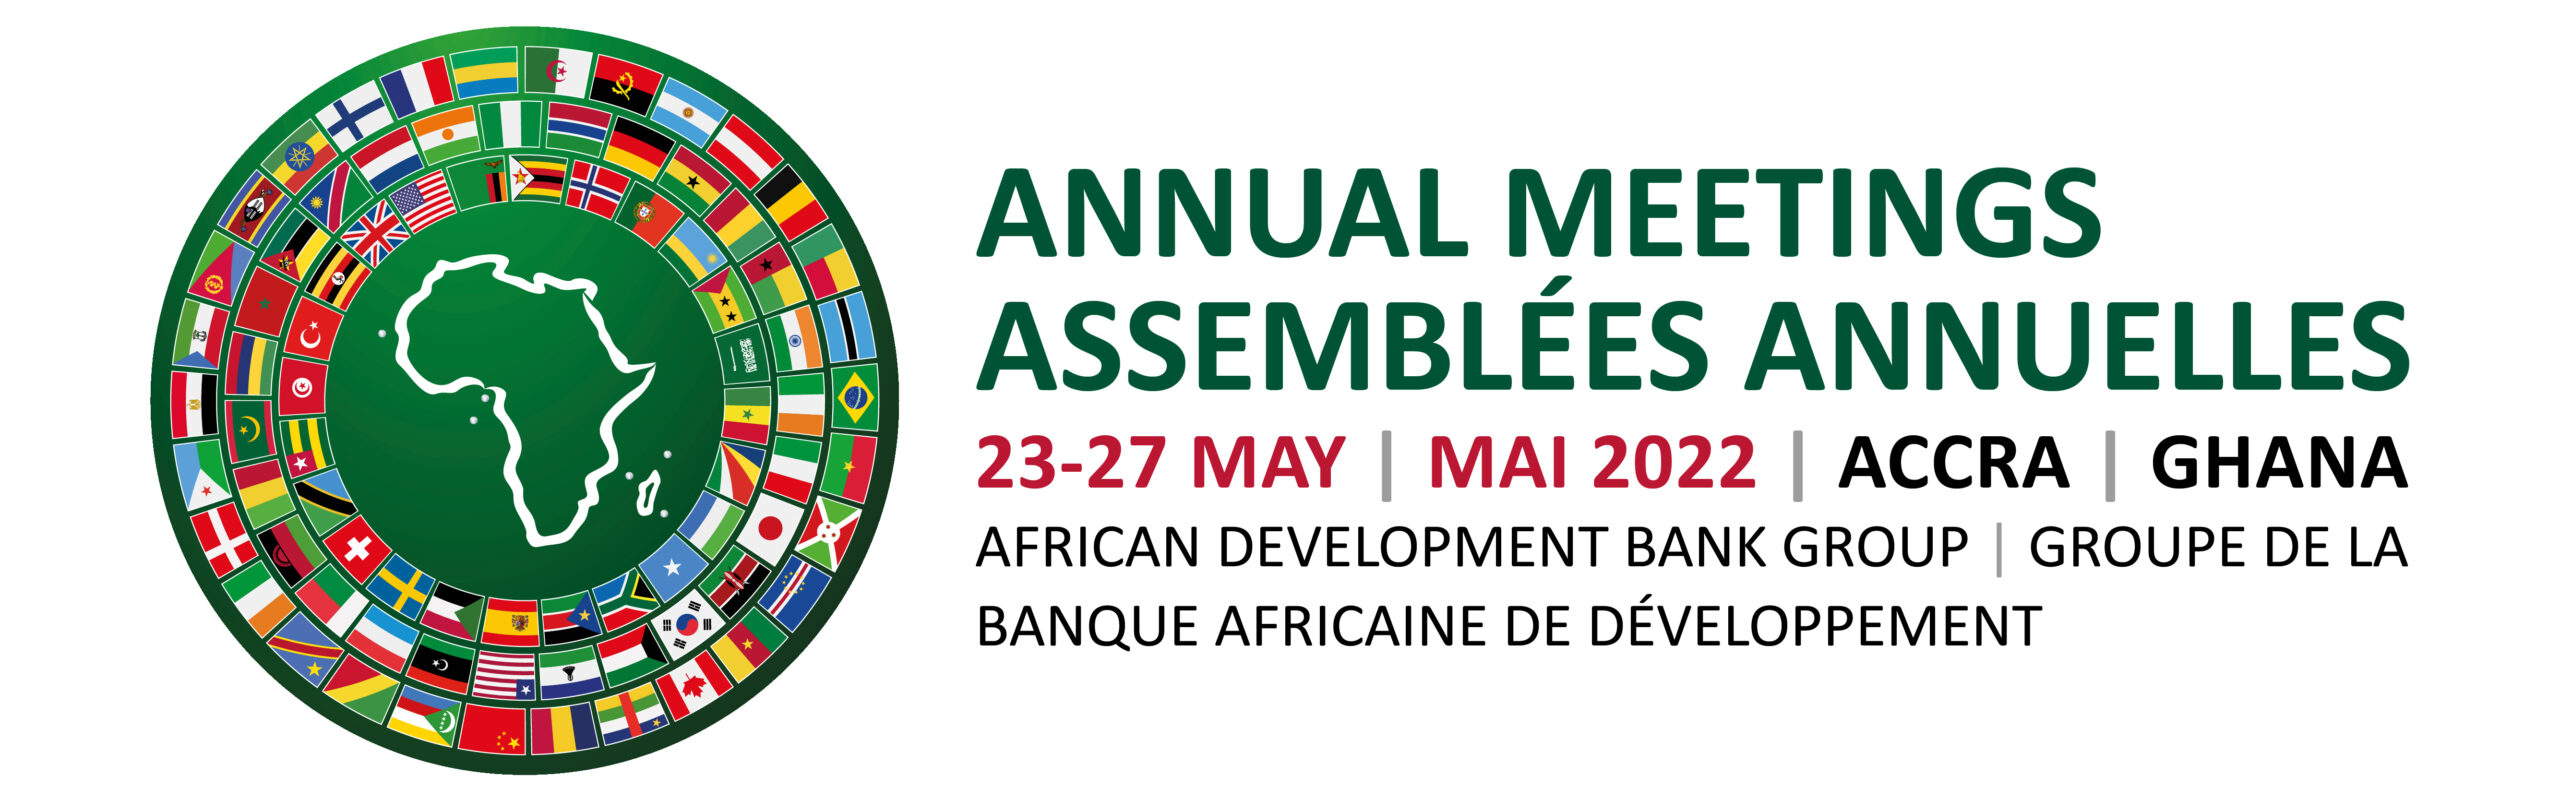 AFRICAN DEVELOPMENT BANK GROUP TO HOLD 2022 ANNUAL MEETINGS FROM MAY 23-27 IN ACCRA, GHANA